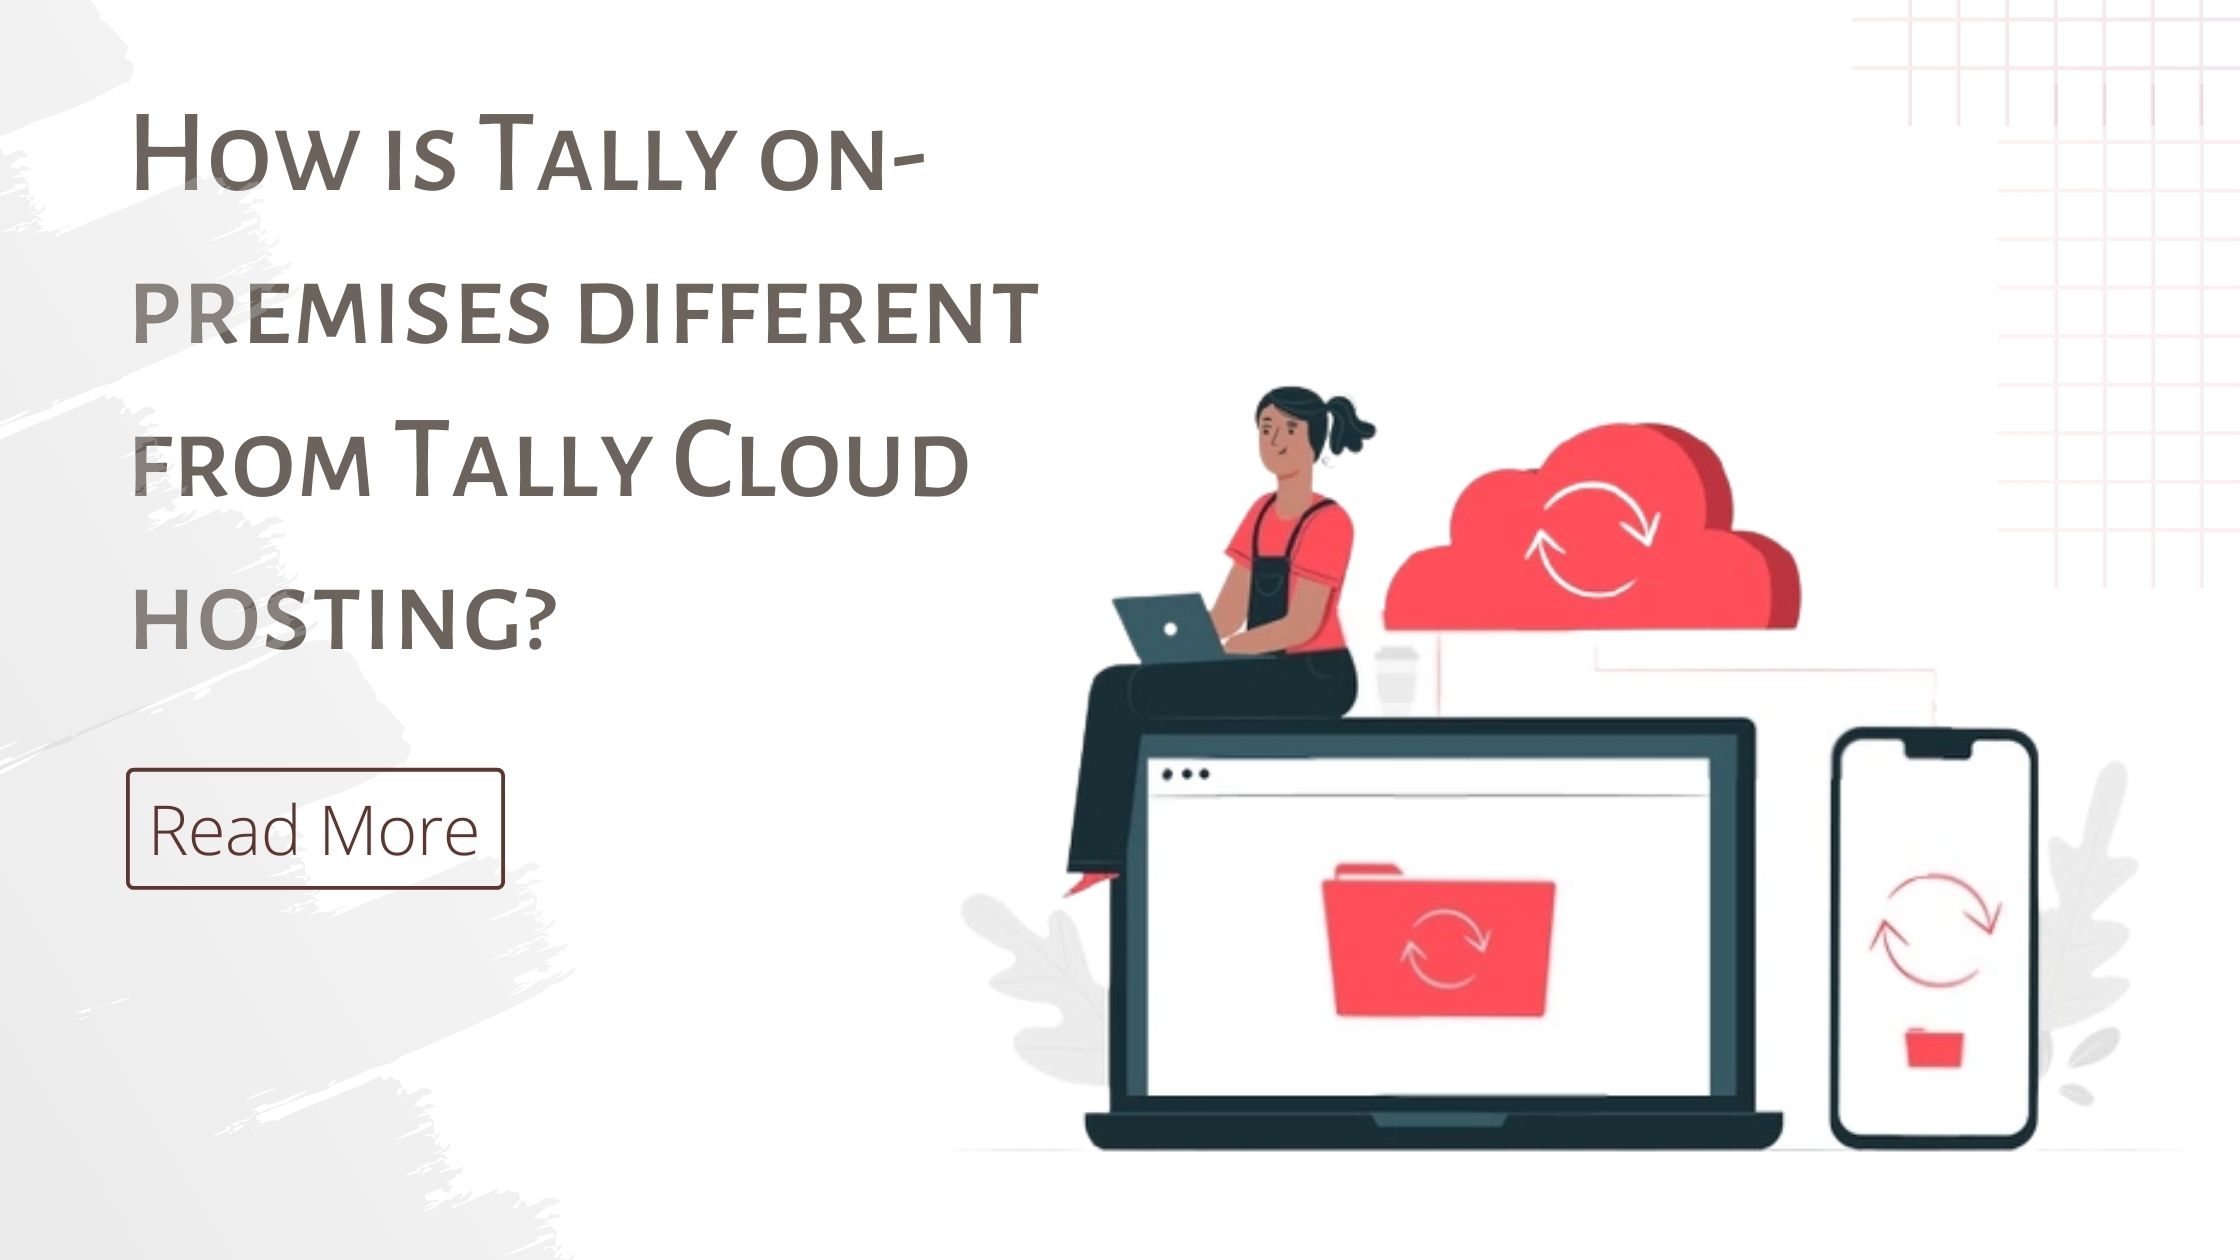 Tally on cloud different from on-premises